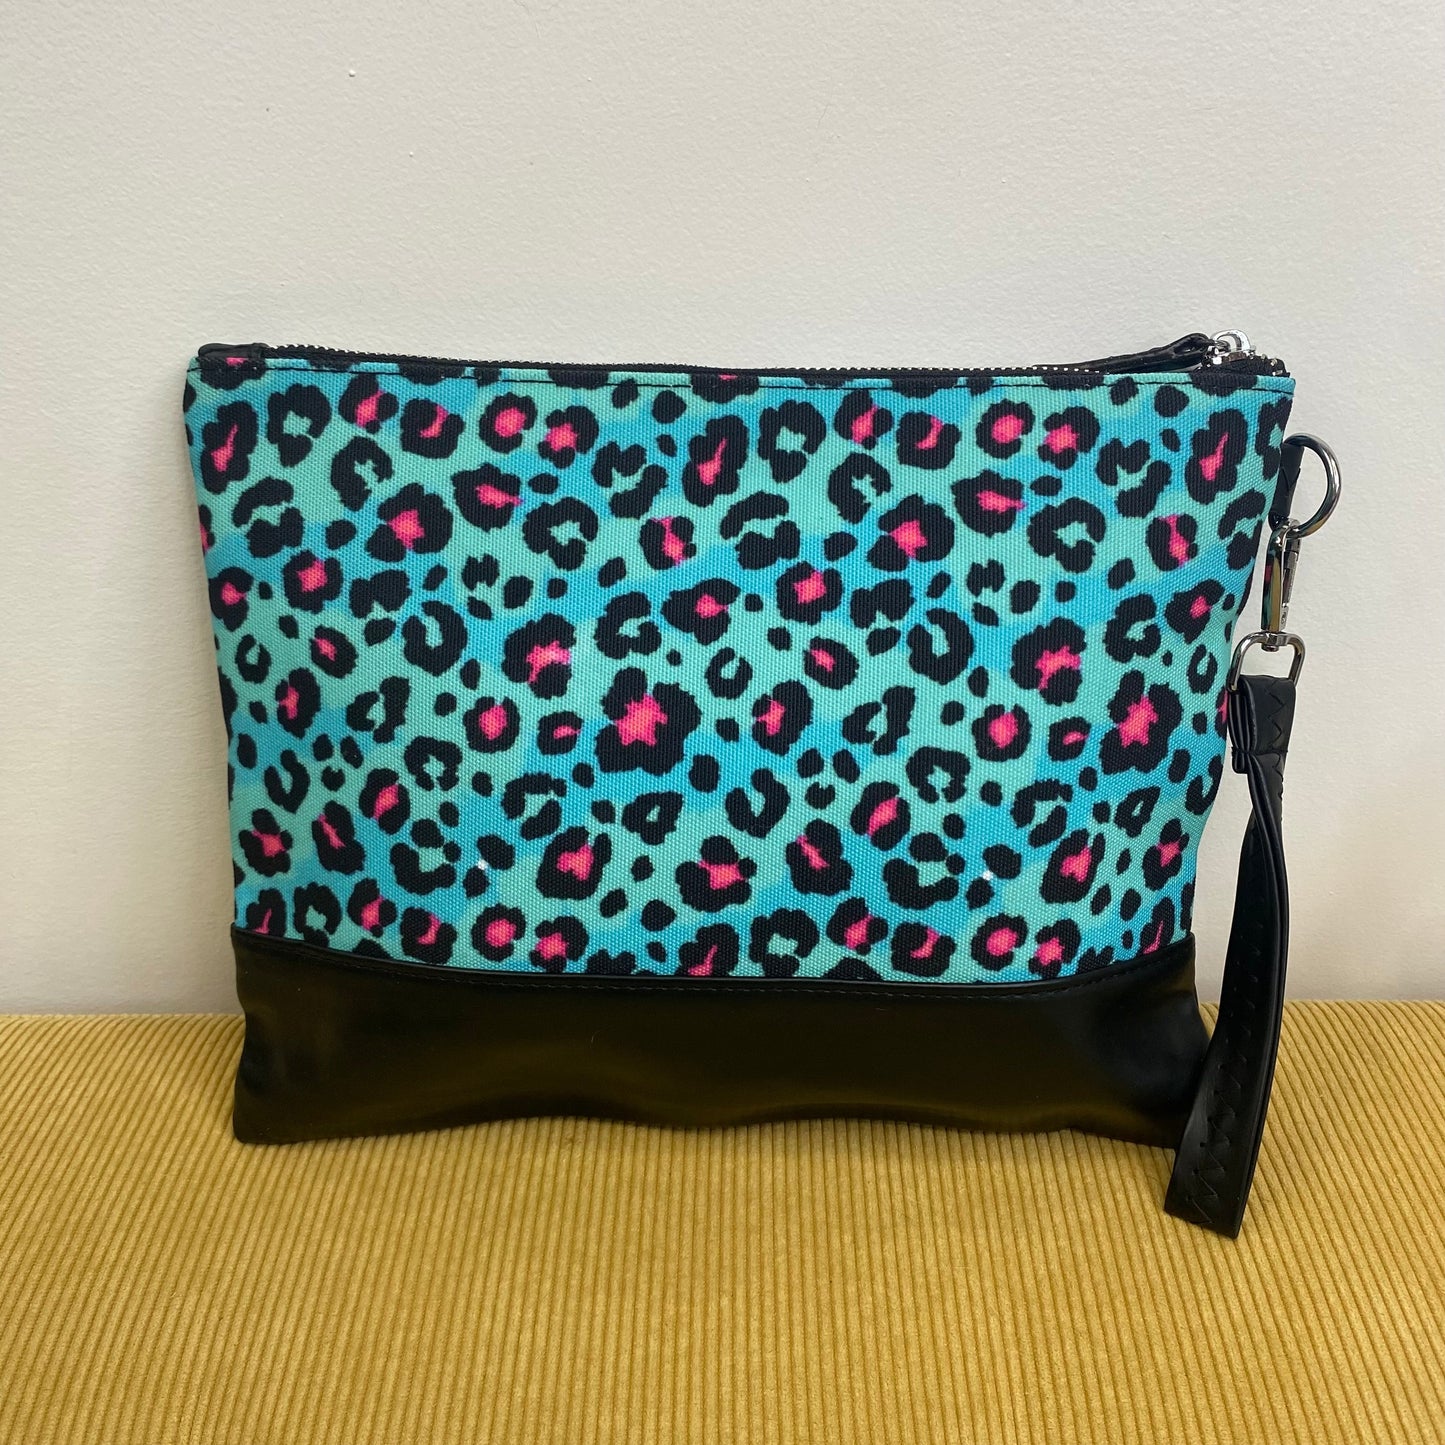 Clutch - Oversized Canvas & Faux Leather with Wrist Loop - Rainbow Leopard